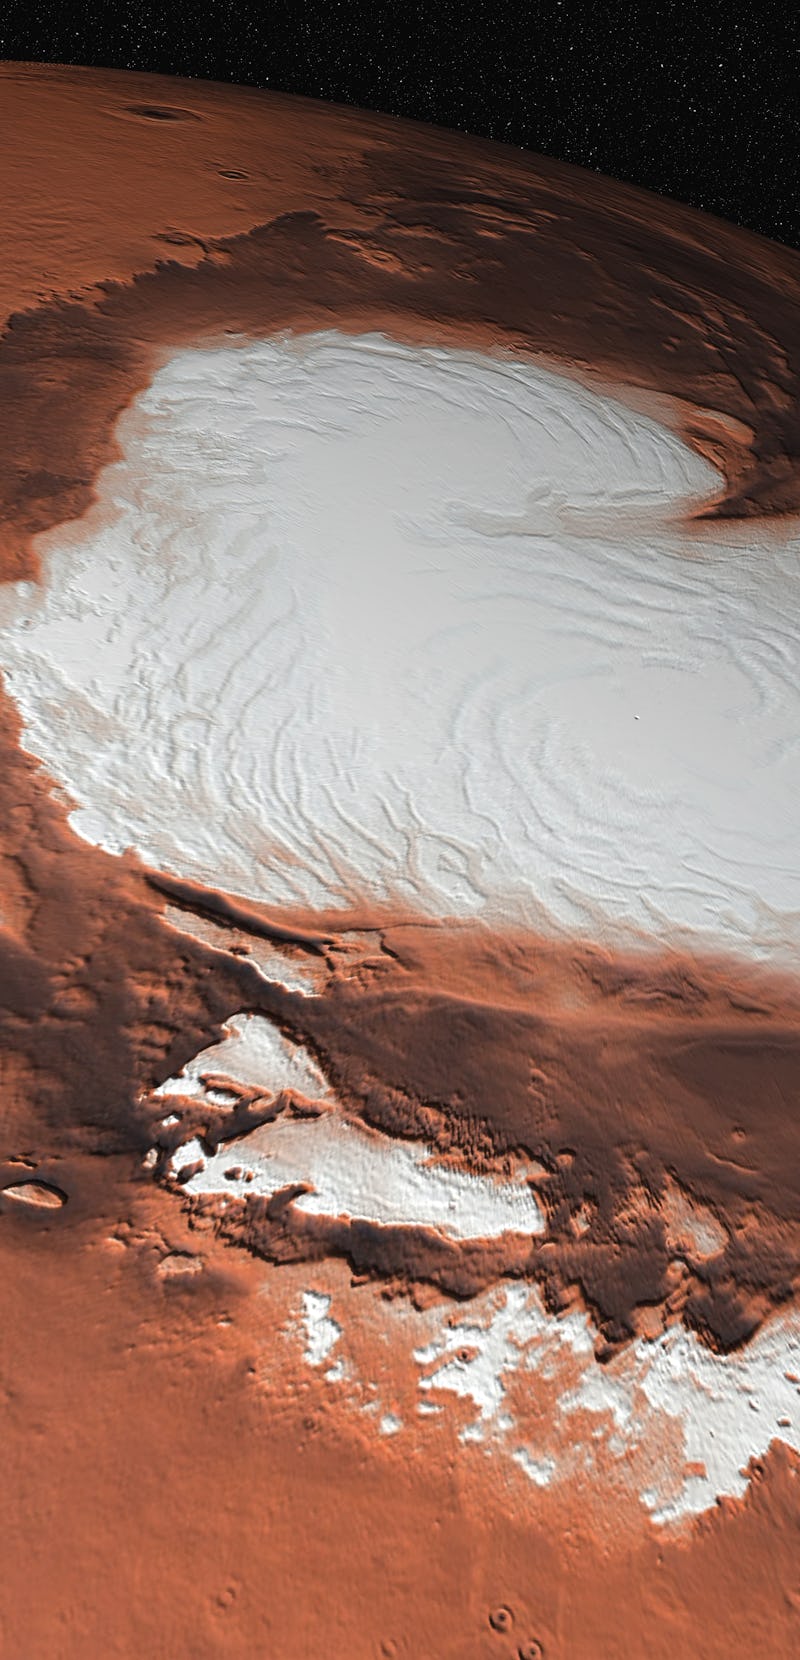 A close-up of the surface on Mars with a visible ice water segment